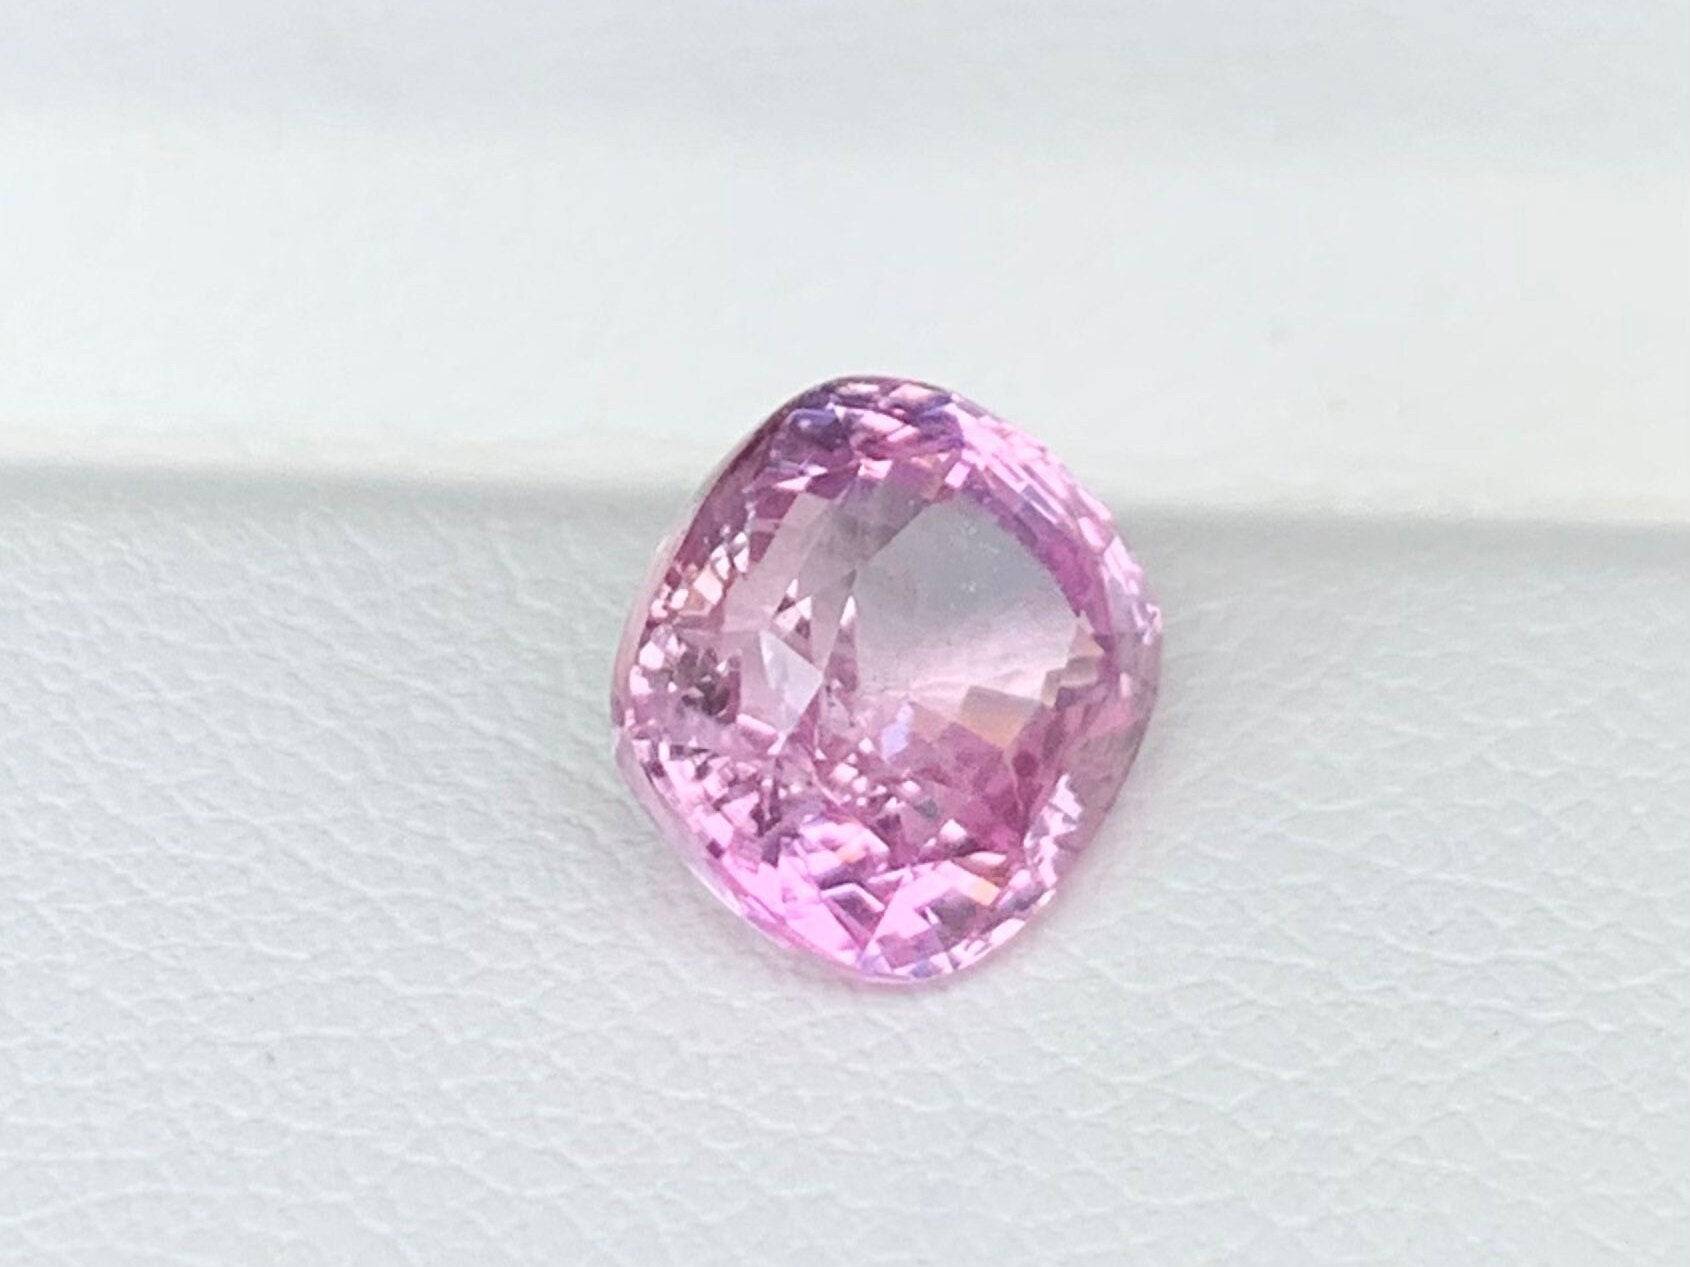 Blush Lavender Peach Sapphire 3.28 Cts, Unheated lavender sapphire, lilac Pinkish purple sapphire engagement Ring,Pink Sapphire Gift For Her - Baza Boutique 